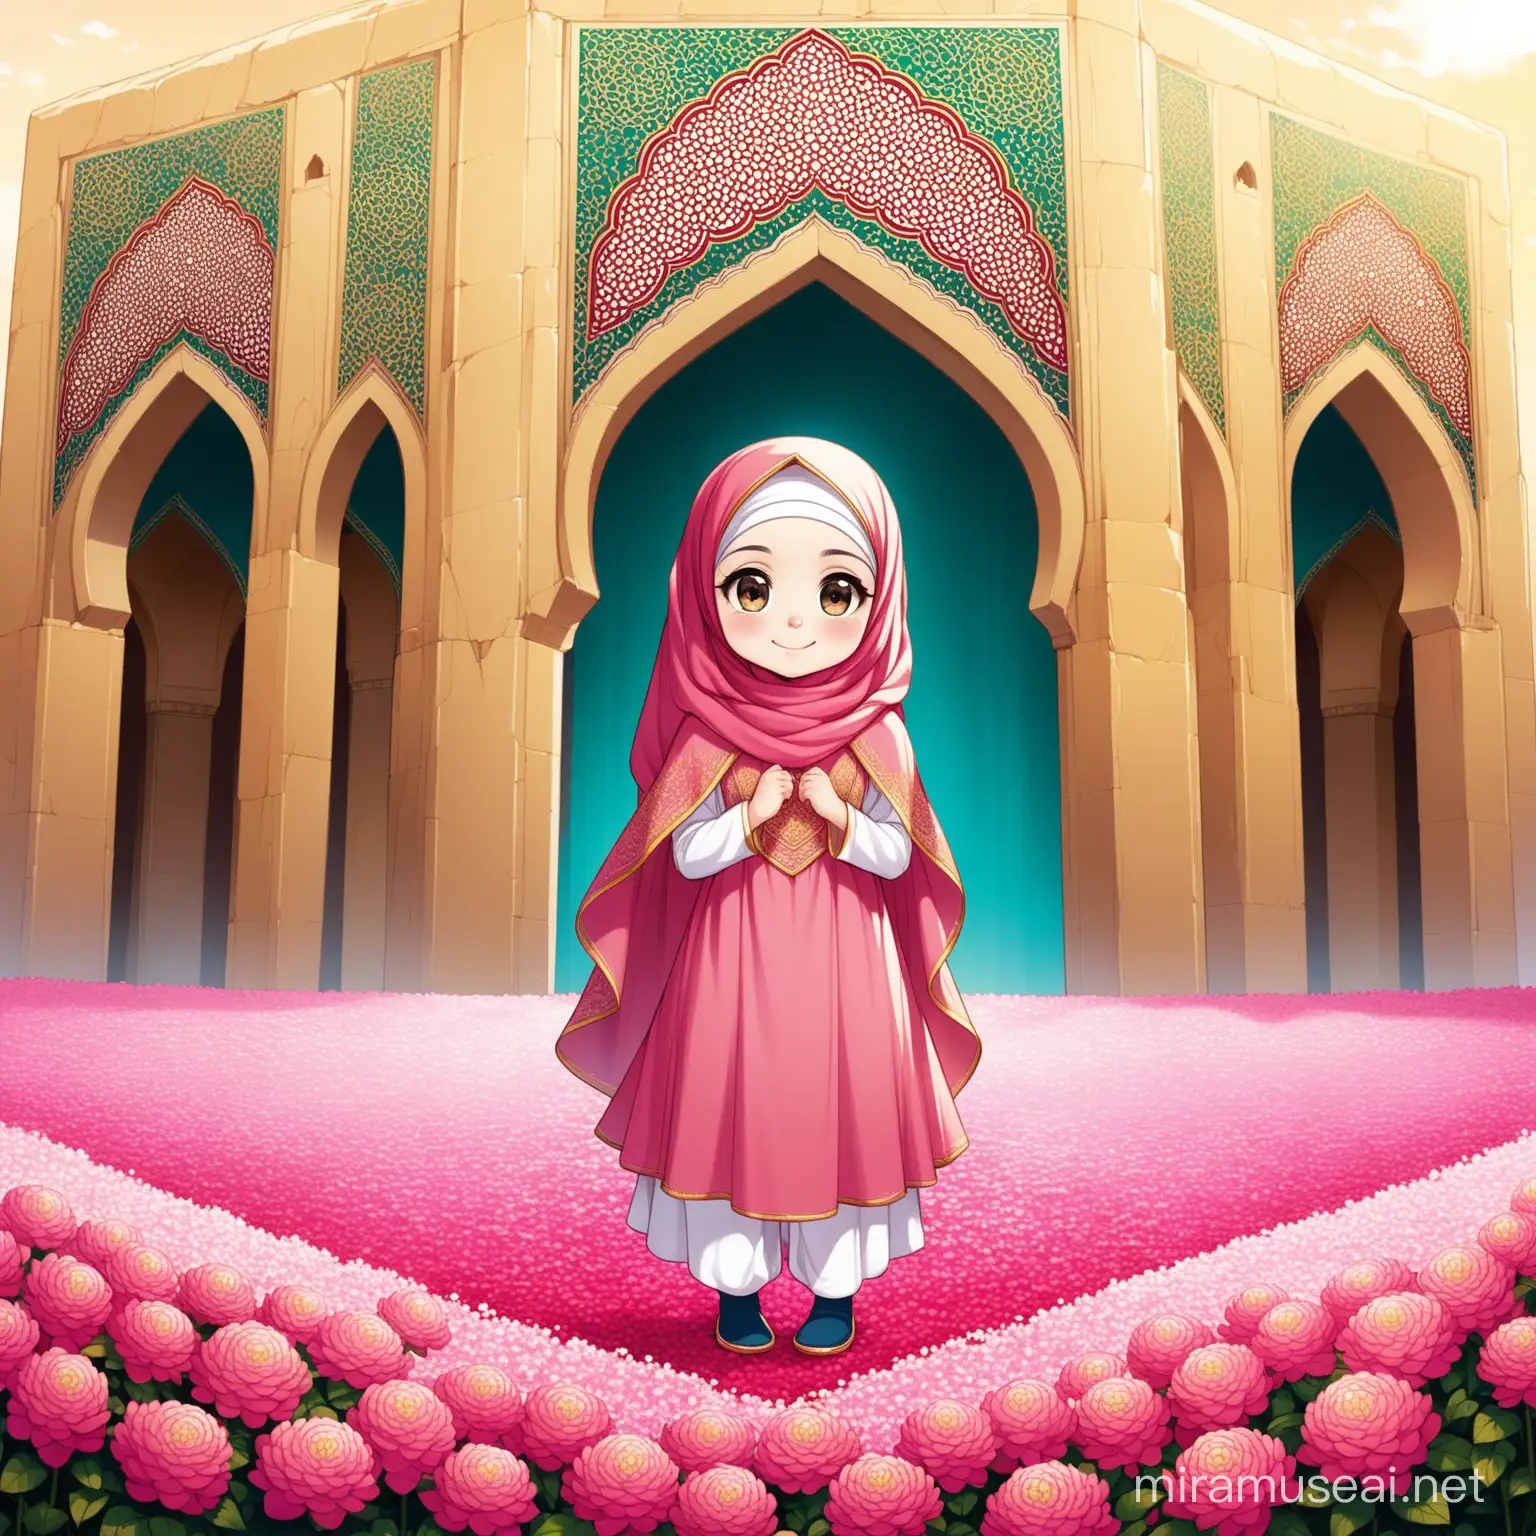 Character Persian little girl(full height, Muslim, with emphasis no hair out of veil(Hijab), smaller eyes, bigger nose, white skin, cute, smiling, wearing socks, clothes full of Persian designs).

Atmosphere Tomb of Hafez, nice flag of Iran proudly raised and full of many pink flowers, lake, sparing.